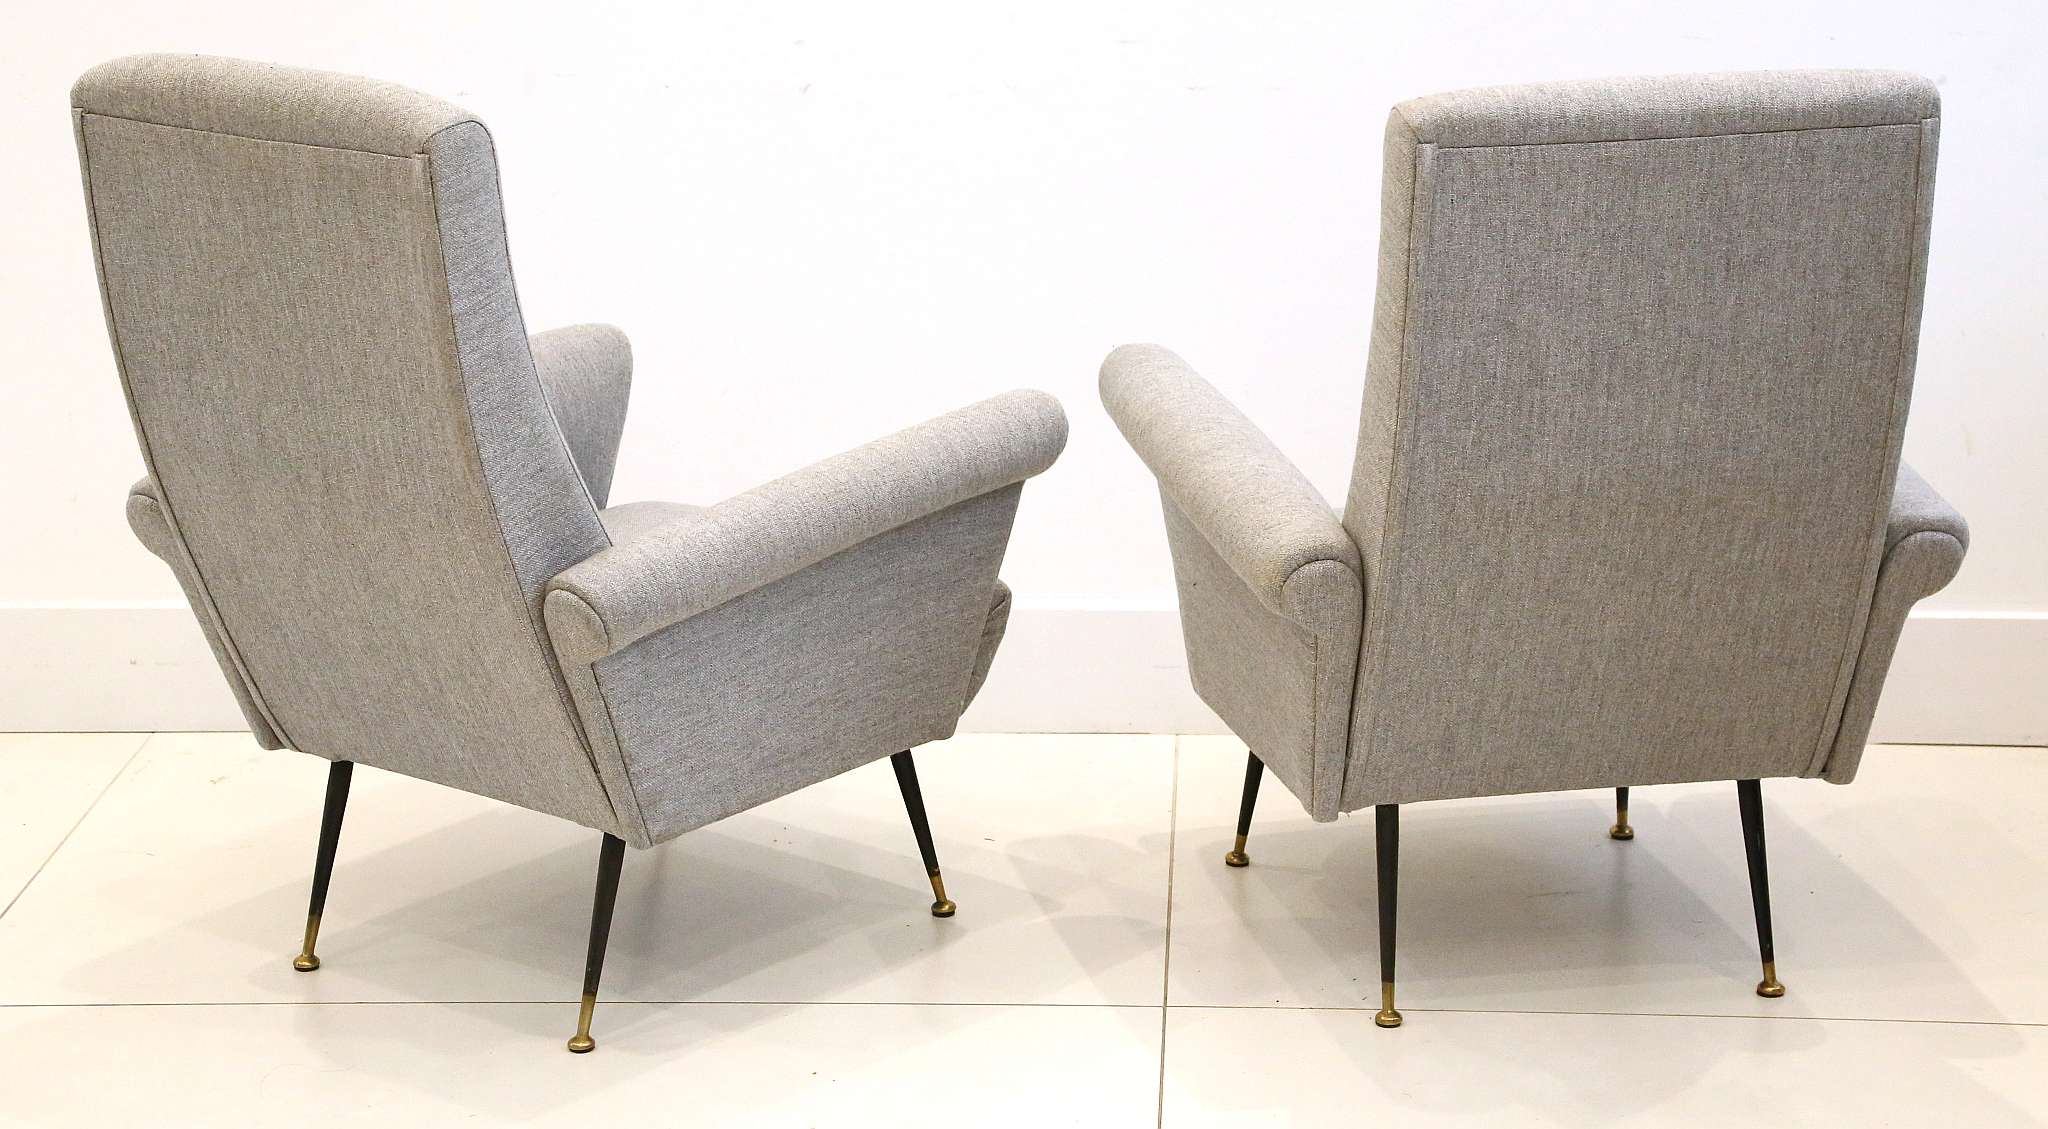 A PAIR OF 1950s ITALIAN ARMCHAIRS, newly upholstered in grey, on black enameled legs, (70cm max wide - Image 2 of 2